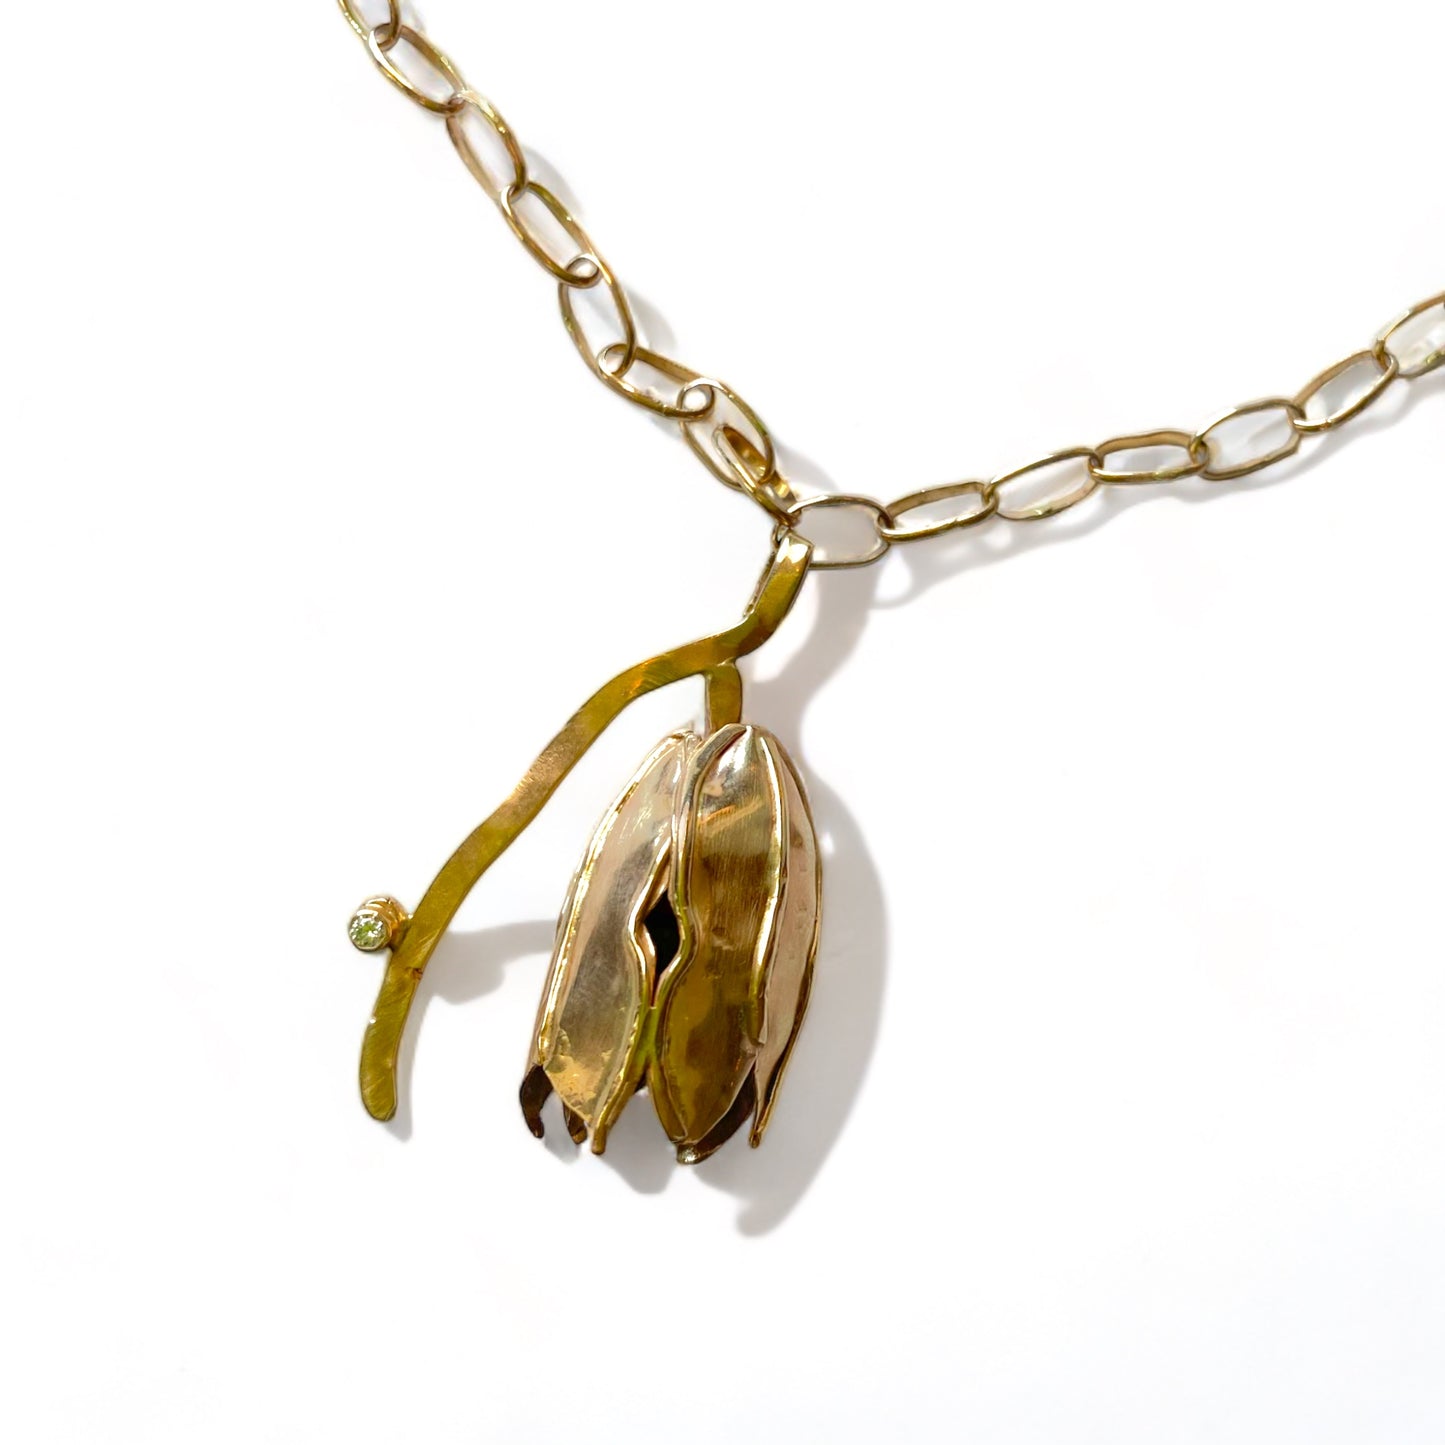 Handmade Yucca Blossom and Chain by Liza Makes Jewelry